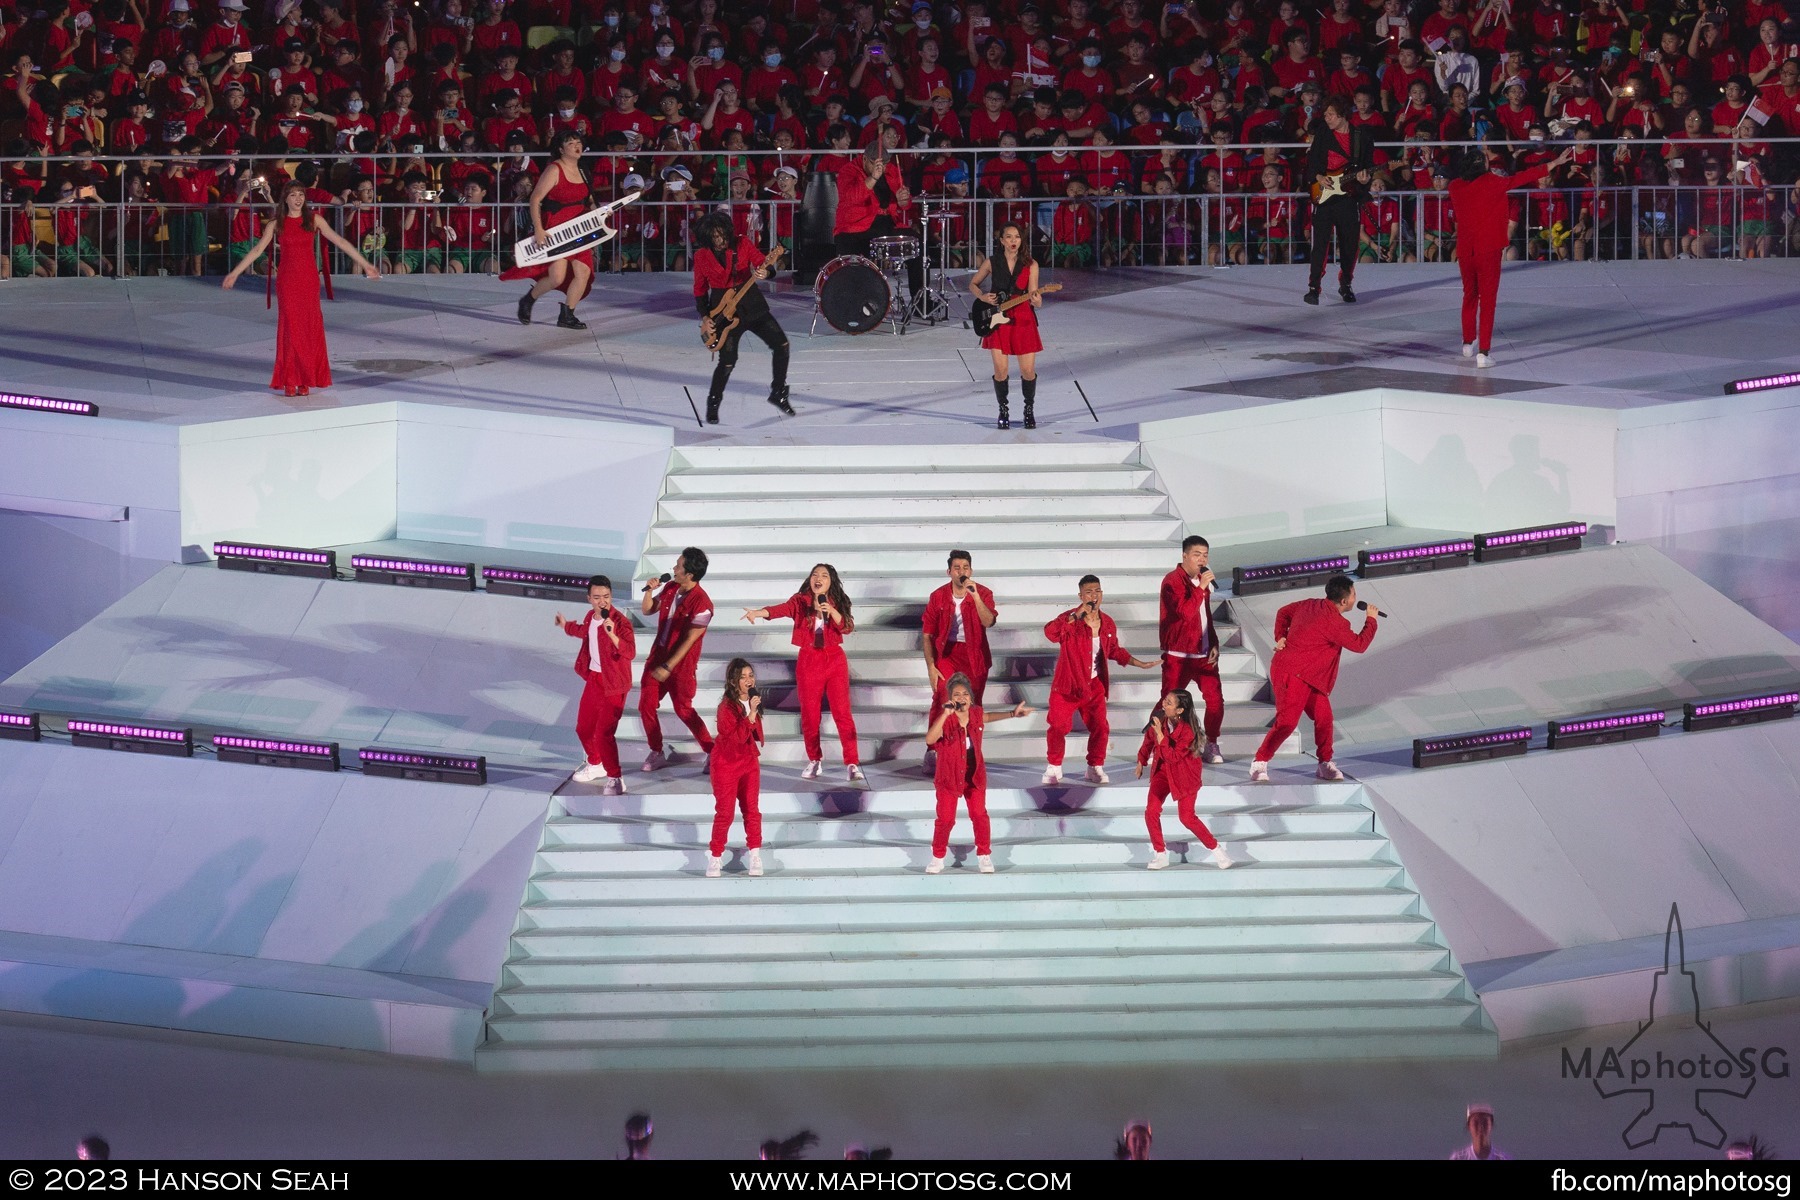 The Island Voices, 53A and Olivia Ong gather on stage to perform the NDP 2023 theme song "Shine Your Light".